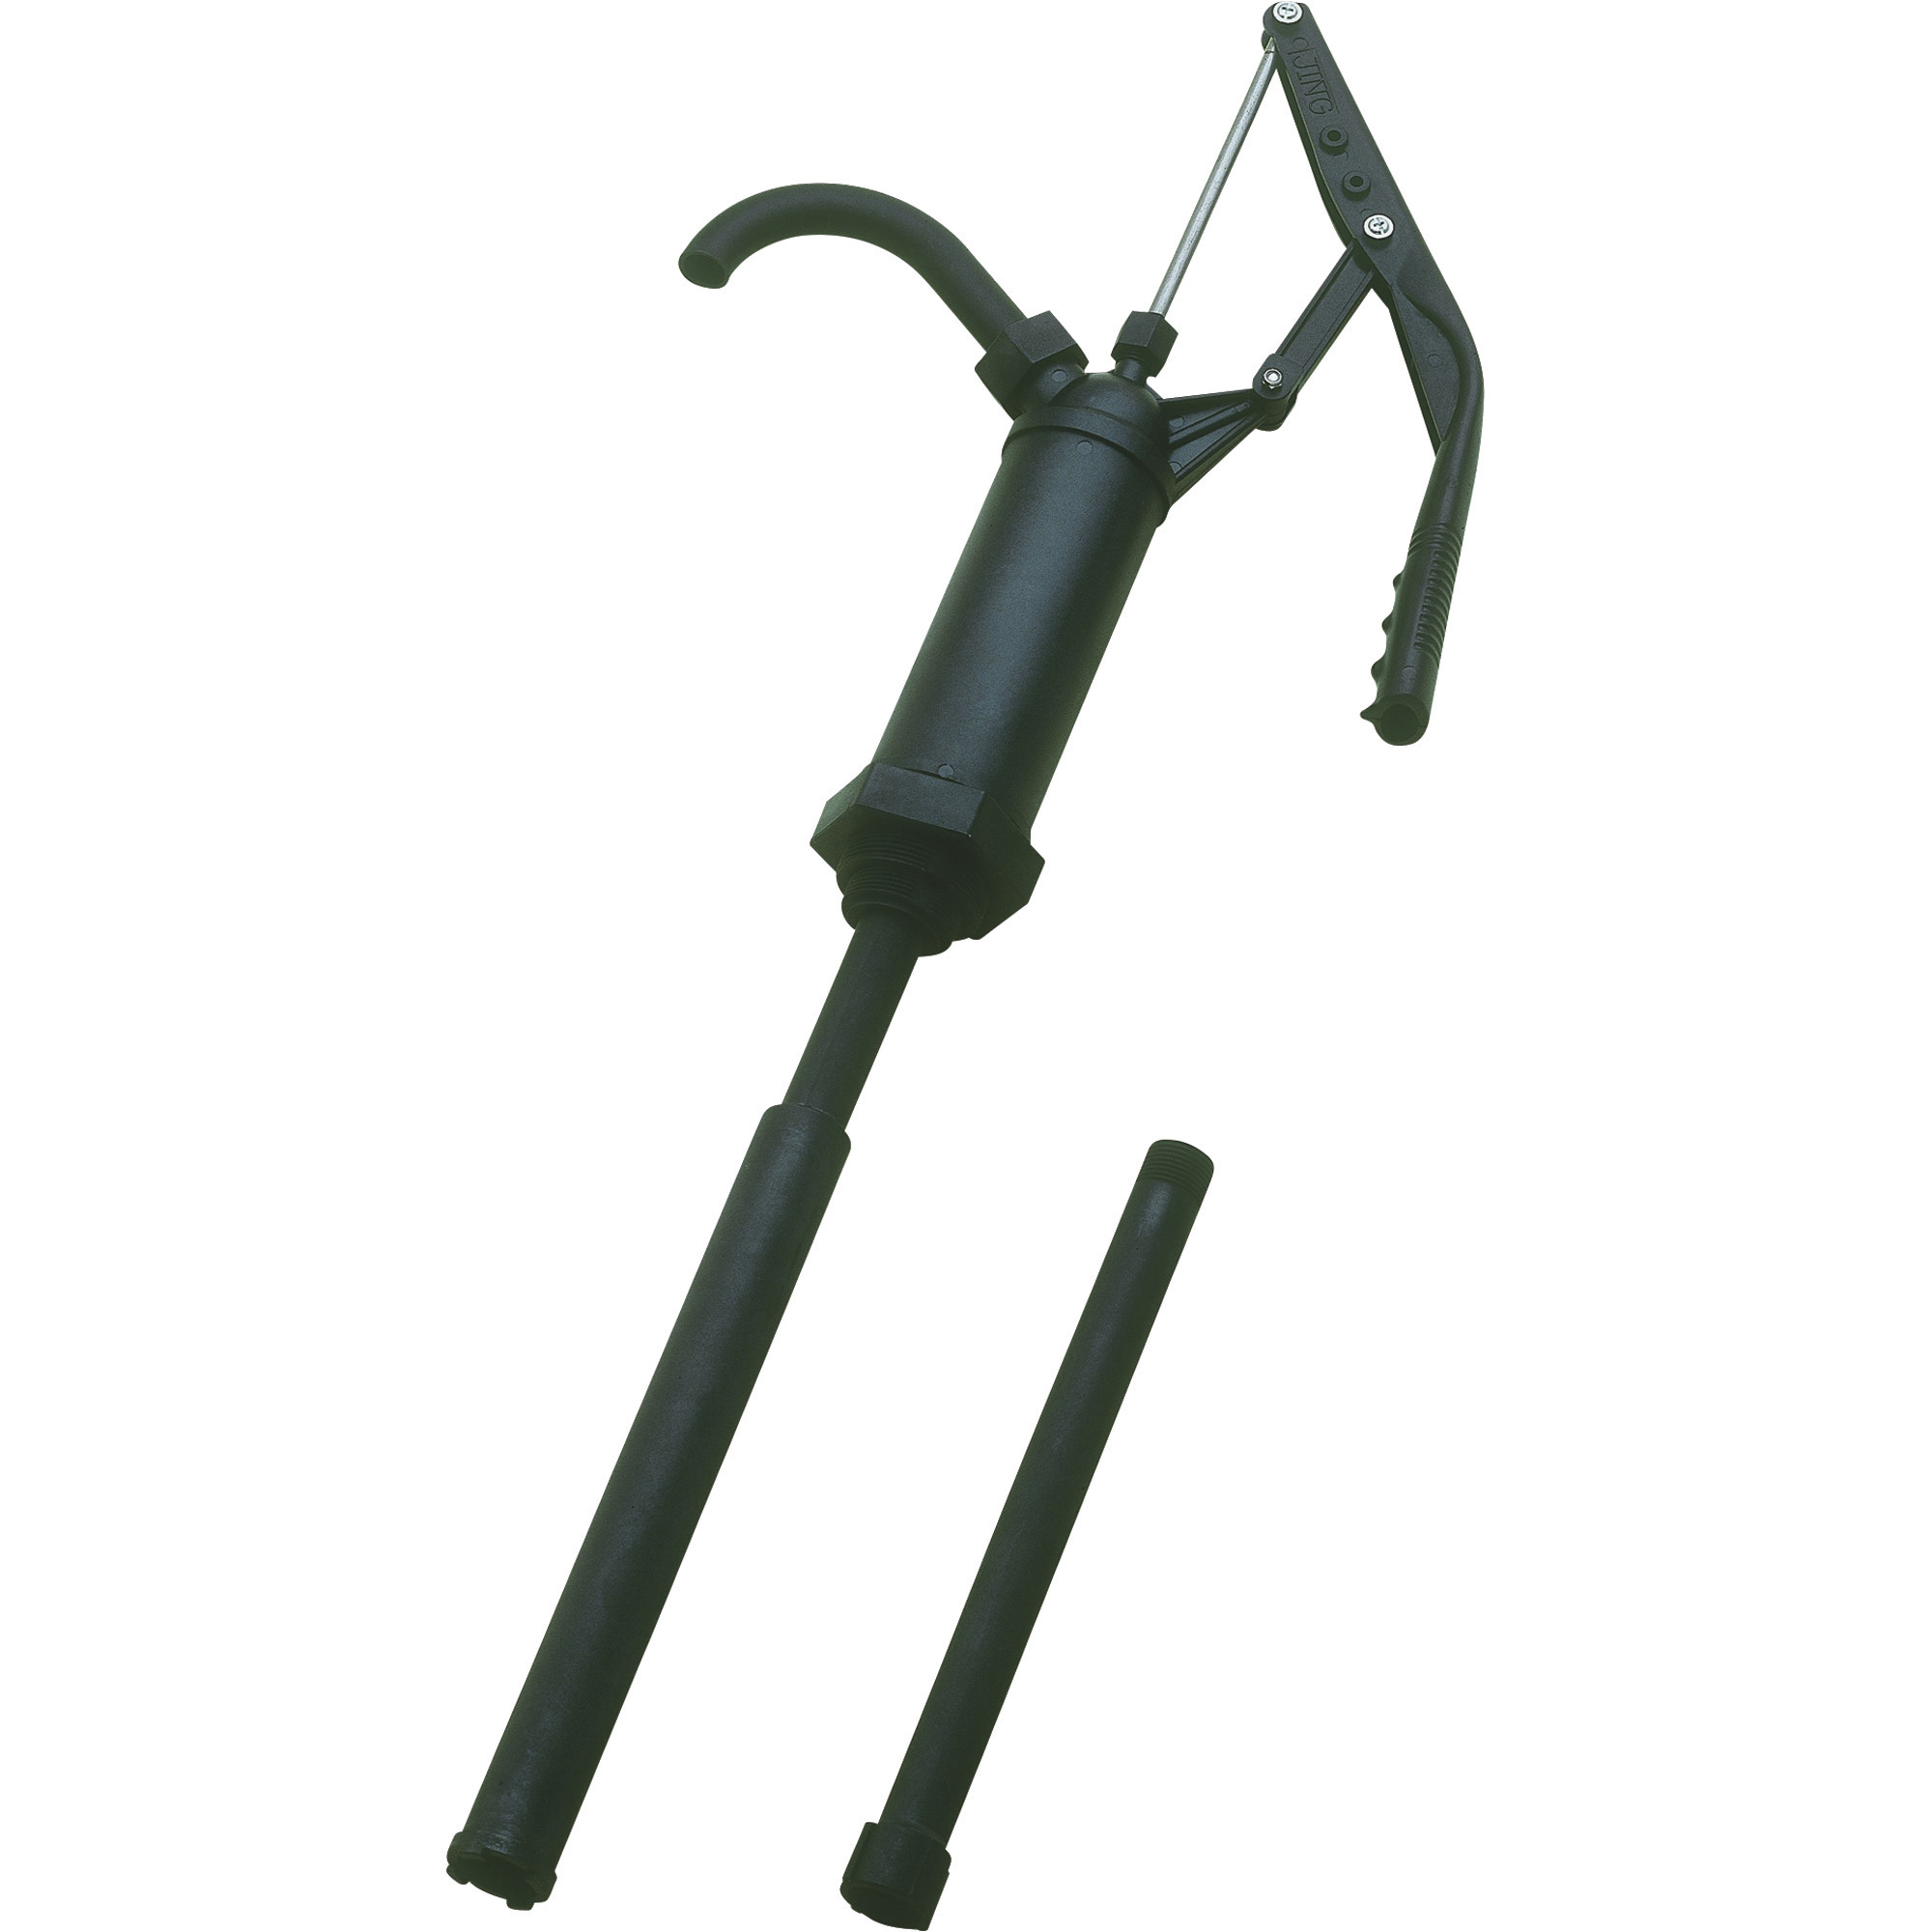 Roughneck Lever Action Drum Hand Pump, Fits 15- to 55-Gallon Drums